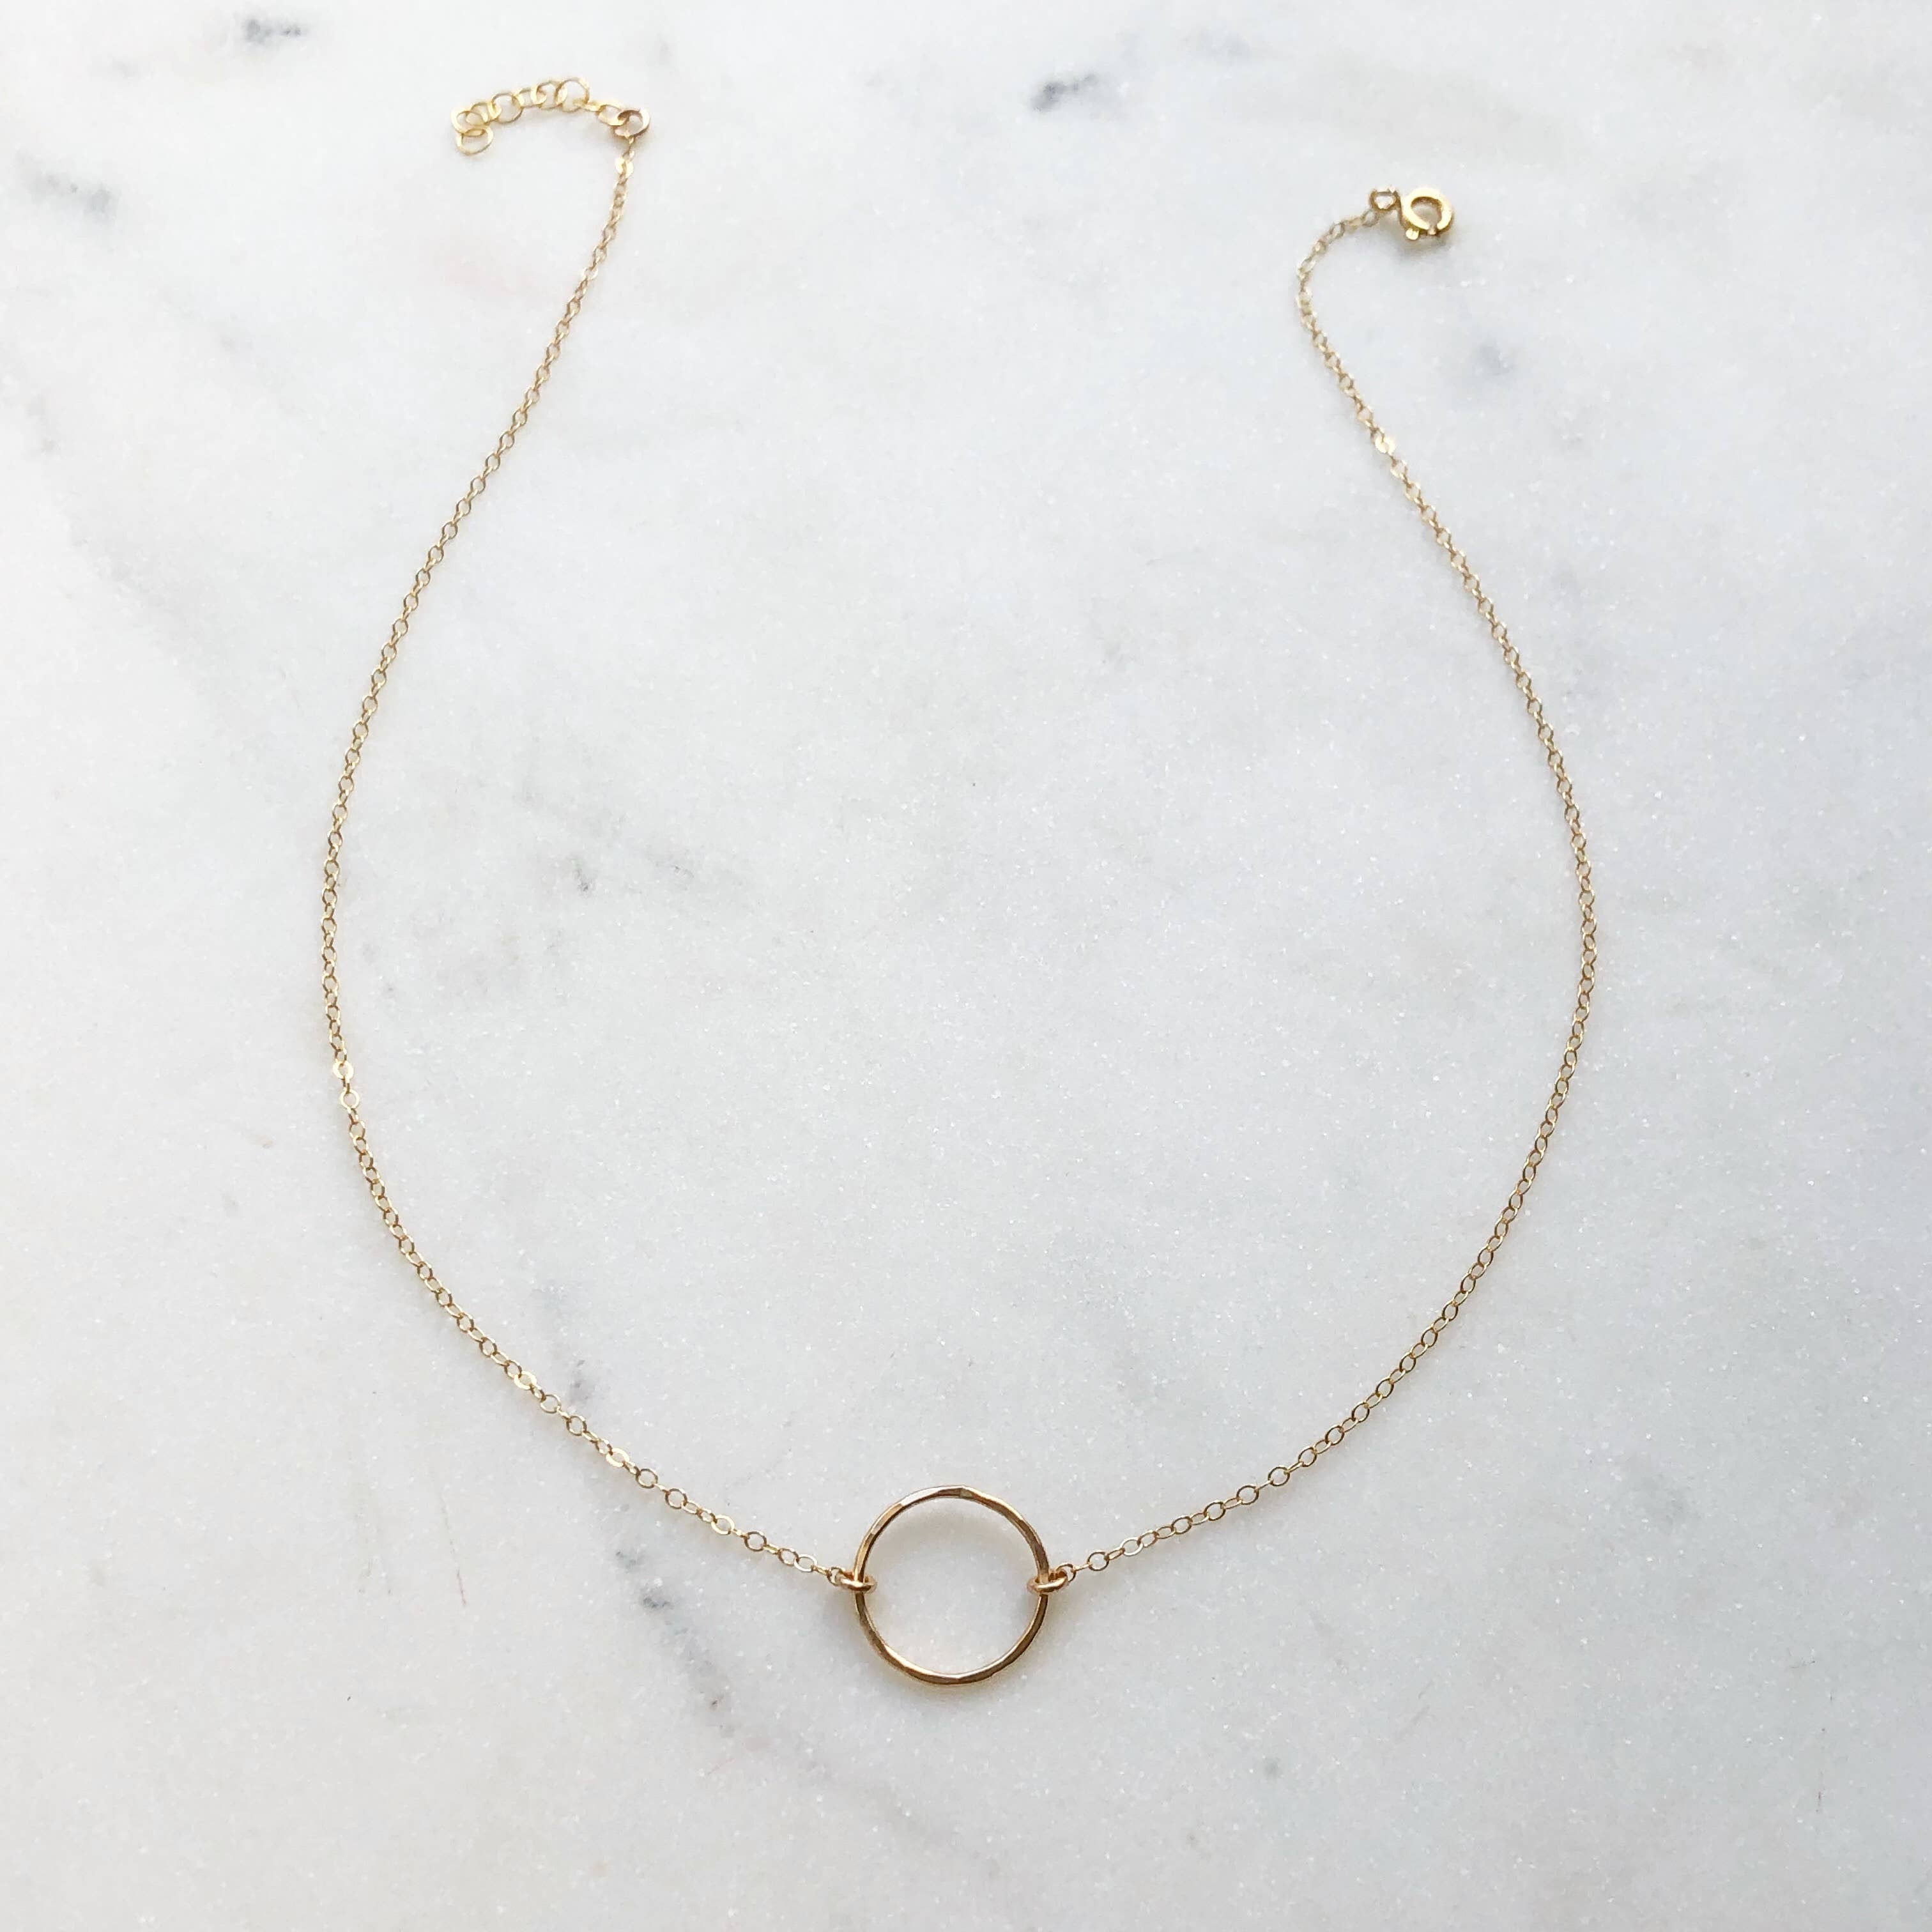 The Eternity Necklace by Token Jewelry